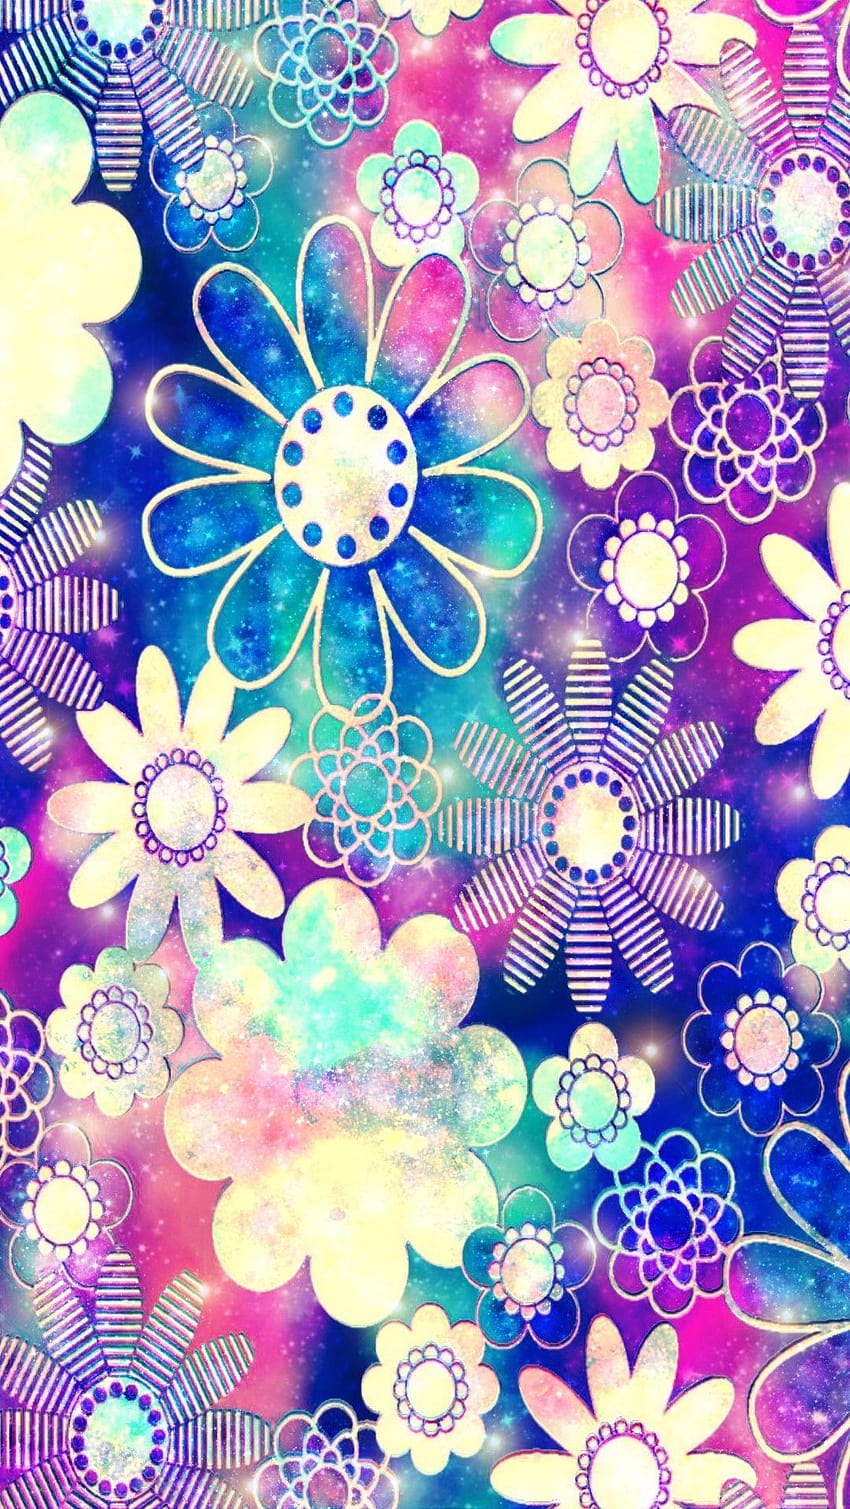 Flower Frenzy Galaxy, made by me, glitter floral HD phone wallpaper